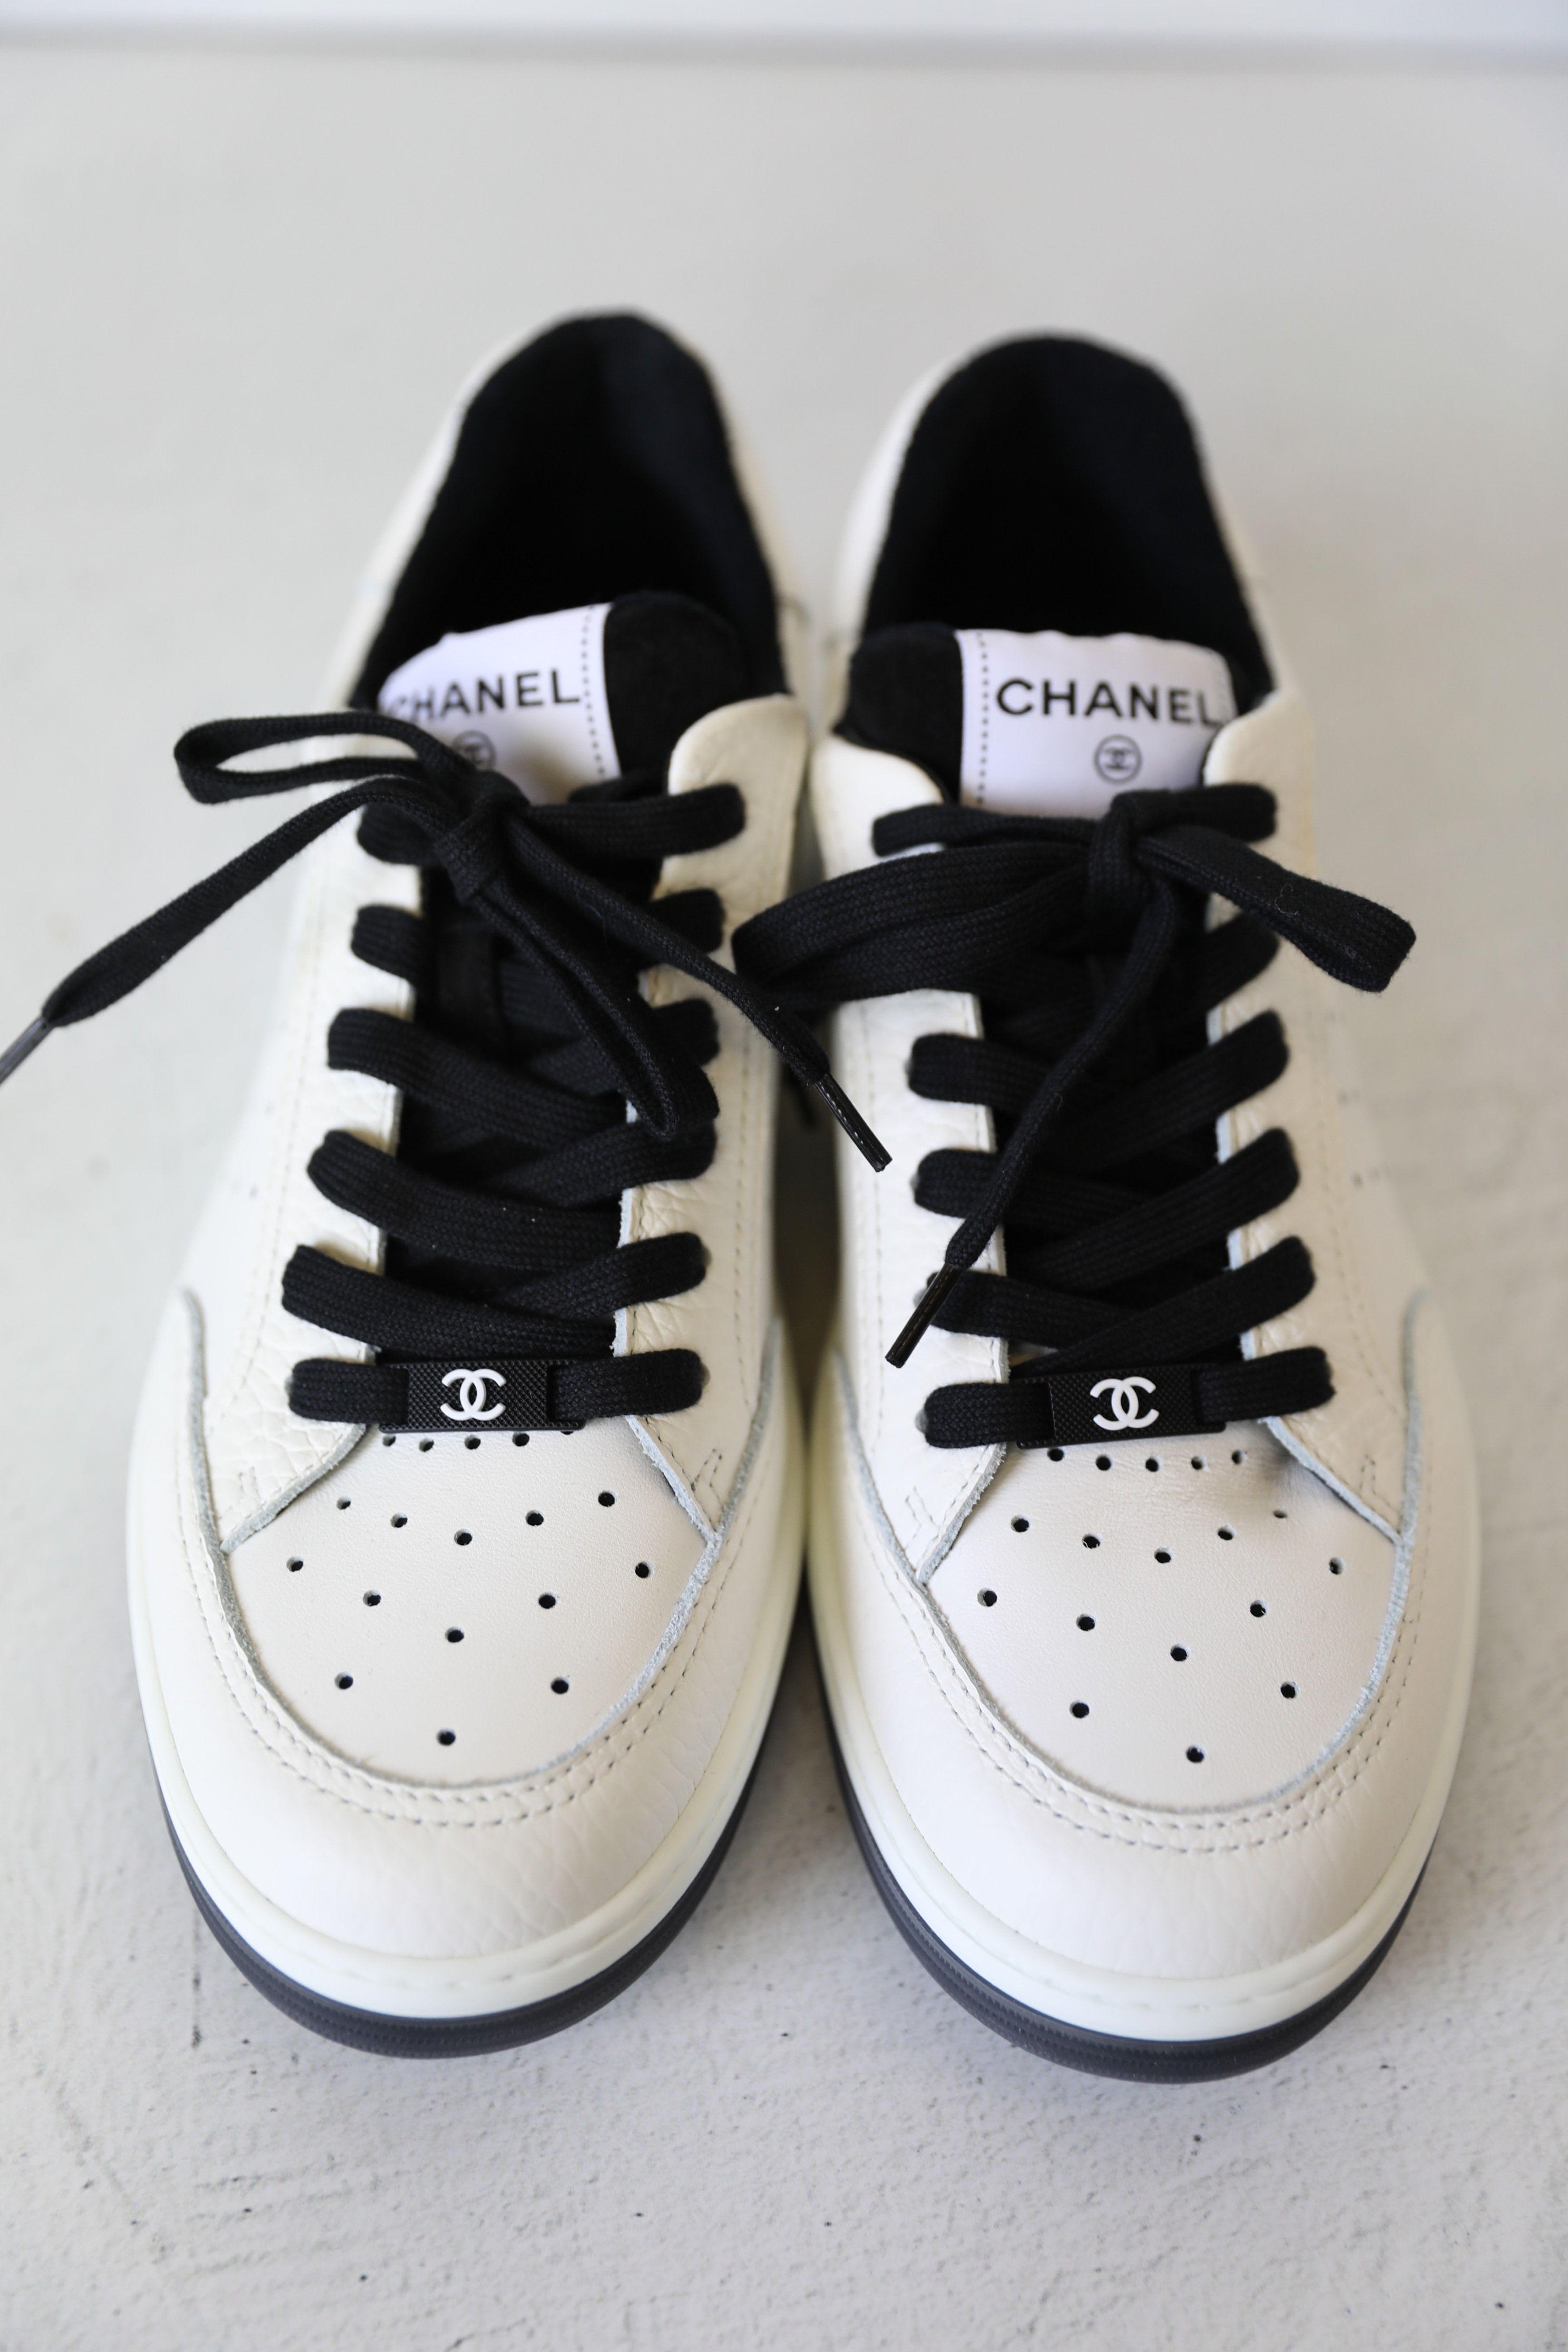 Chanel Shoes Sneakers, Black and White, Size 40, New in Box WA001